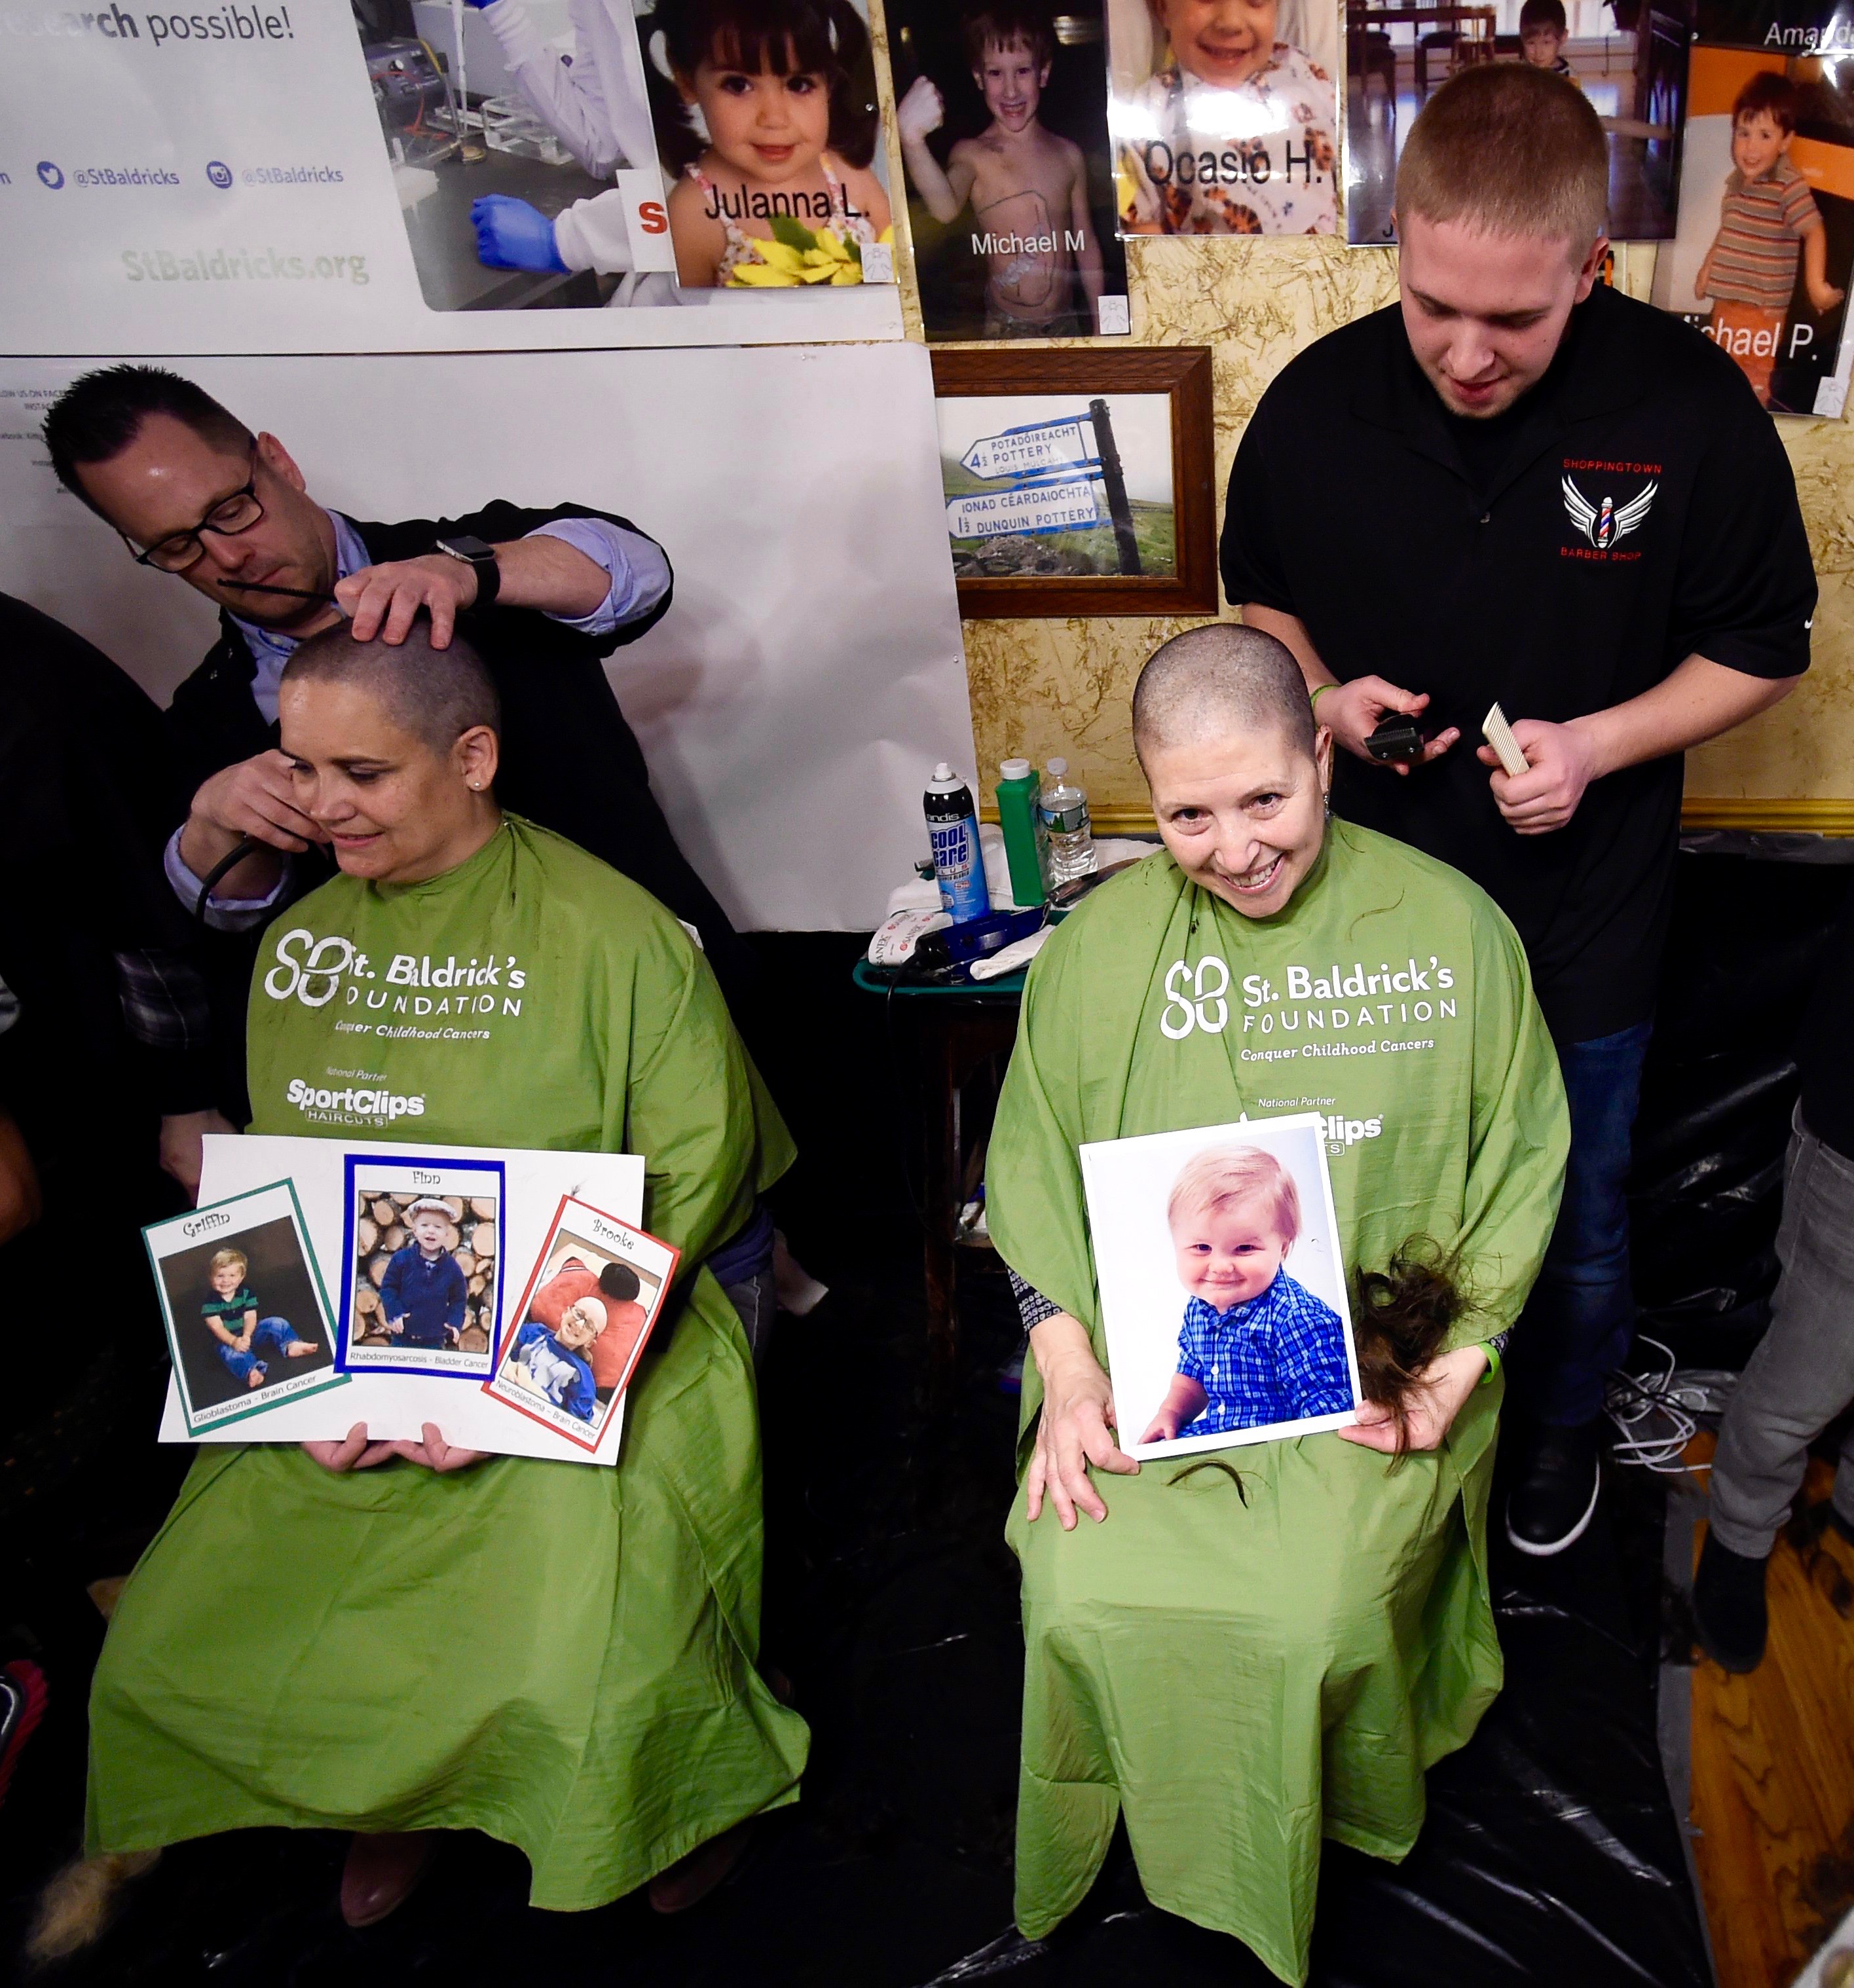 St. Baldrick‘s Day in Syracuse raises money for the cure of childhood cancer. Participants are shown at Kitty Hoynes, an Irish pub in Syracuse, on April 2, 2017. Last year, more than 530 people had their locks shaved off in honor of cancer survivors and those who have passed away. (PHOTO BY DENNIS NETT/syracuse.com)